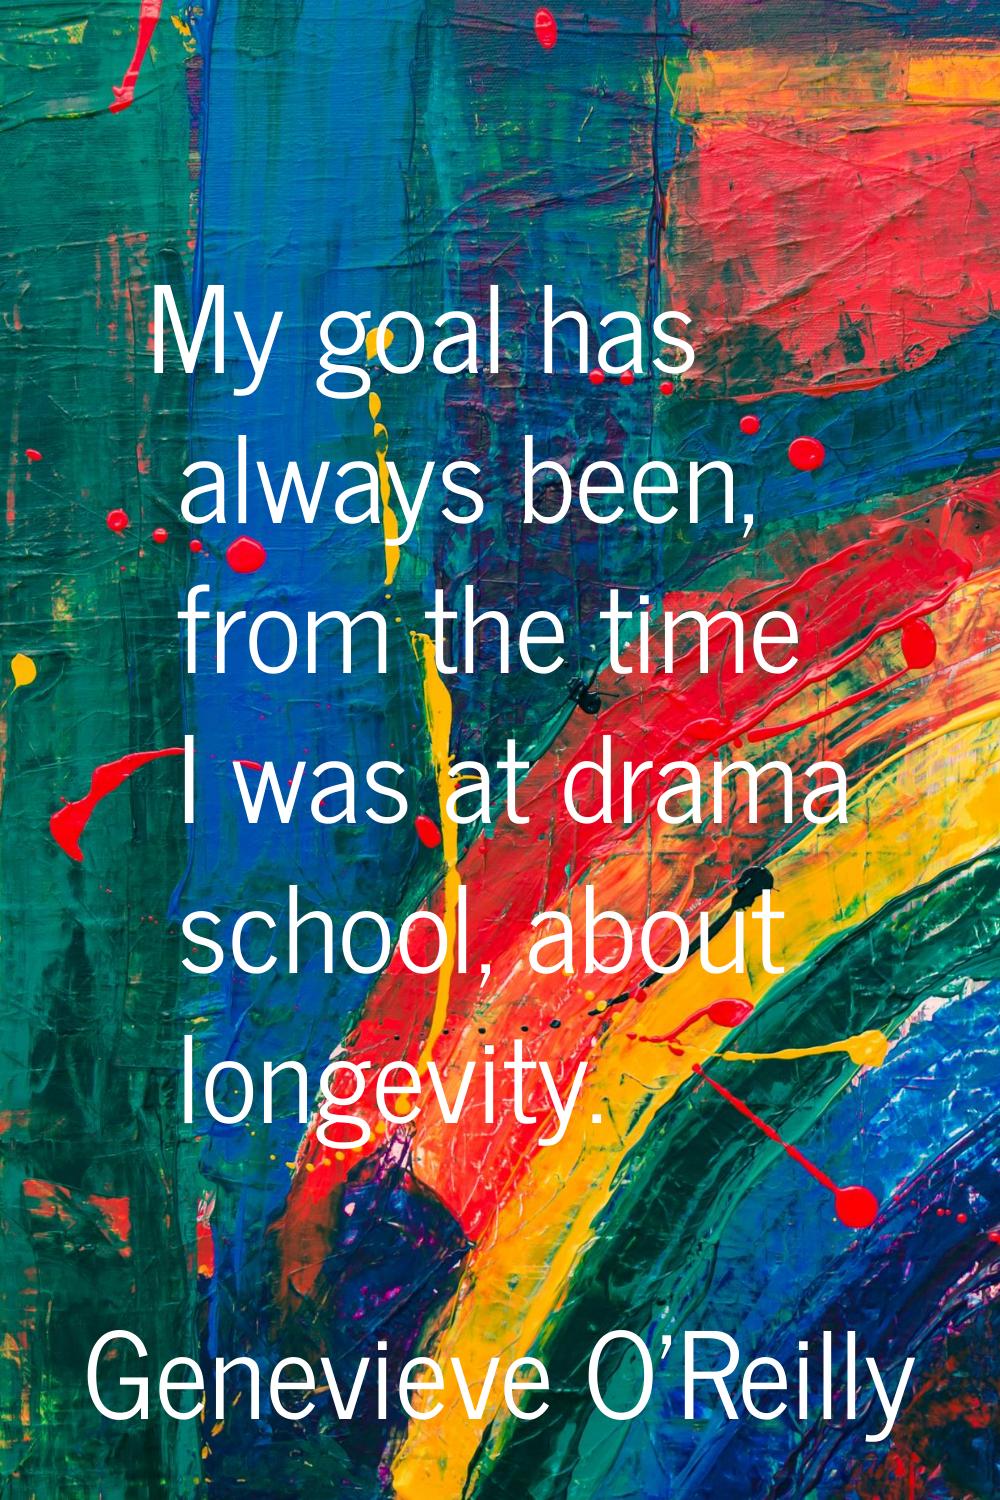 My goal has always been, from the time I was at drama school, about longevity.